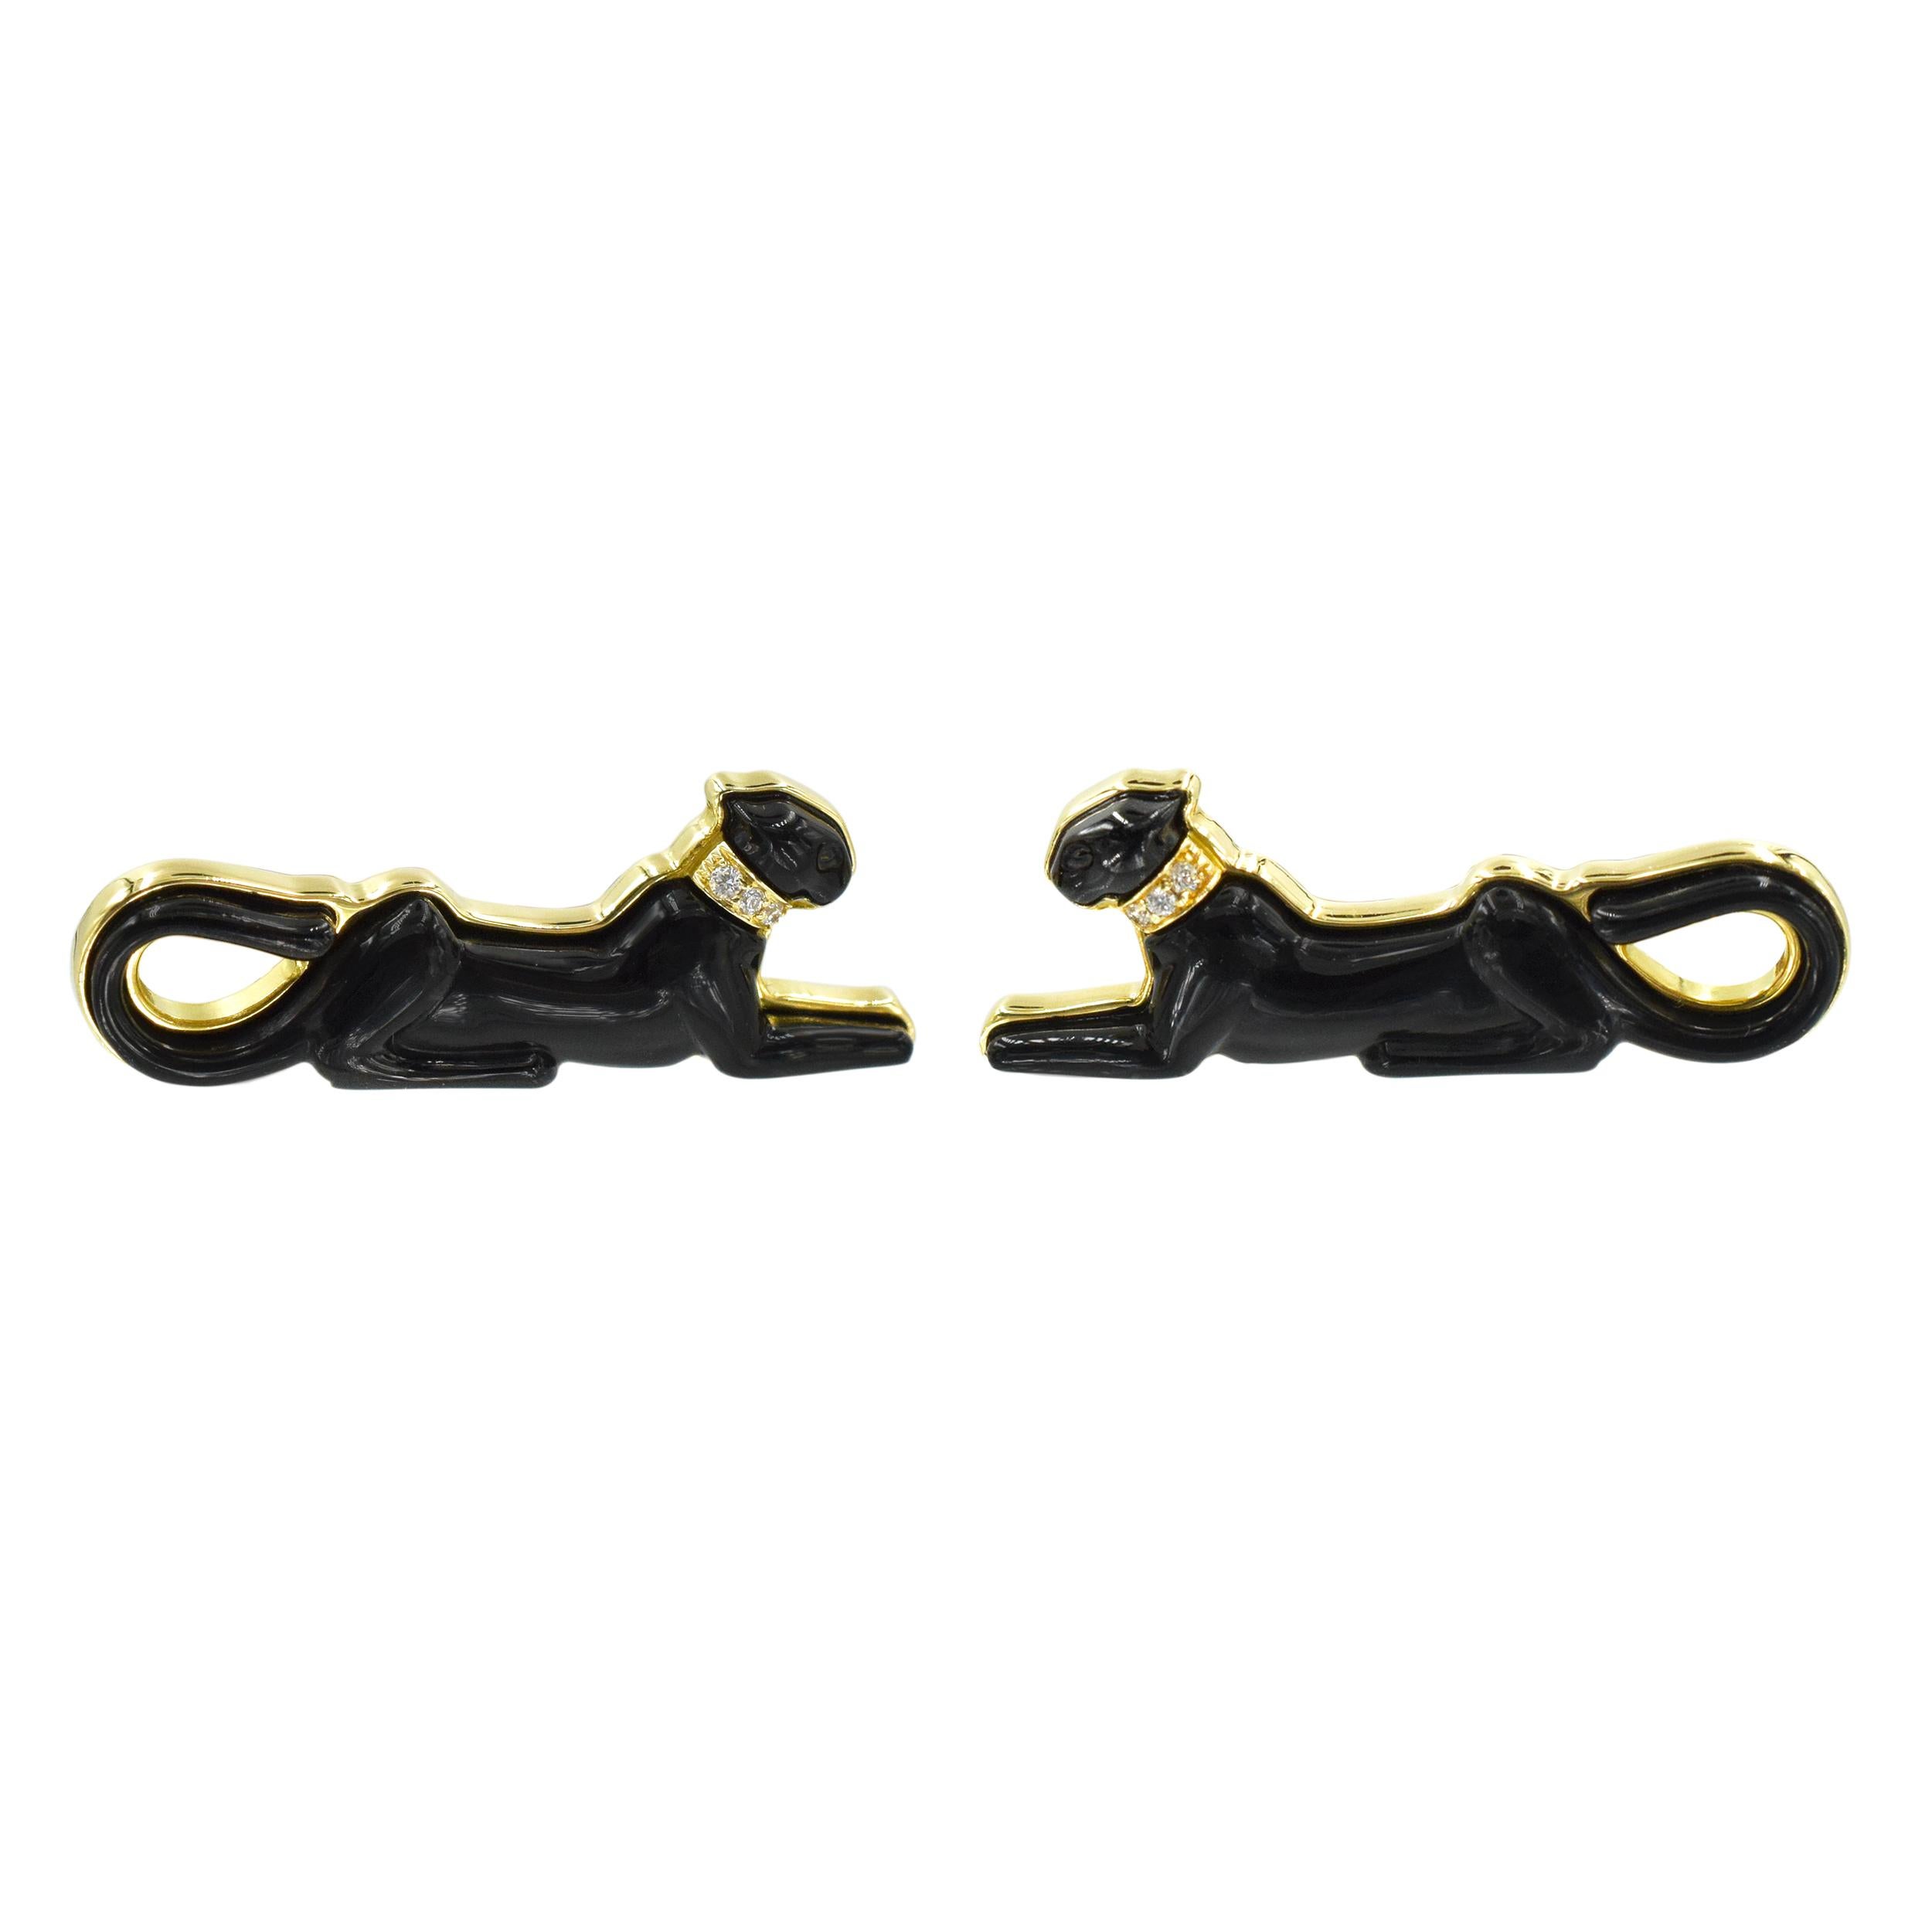 Cartier 18k yellow gold black panthere cufflinks. These iconic cufflinks are crafted in 18k yellow
gold with front featuring lying panther motif sculpted in black lacquer. Each panther
is accented with a yellow gold collar set with 3 round brilliant